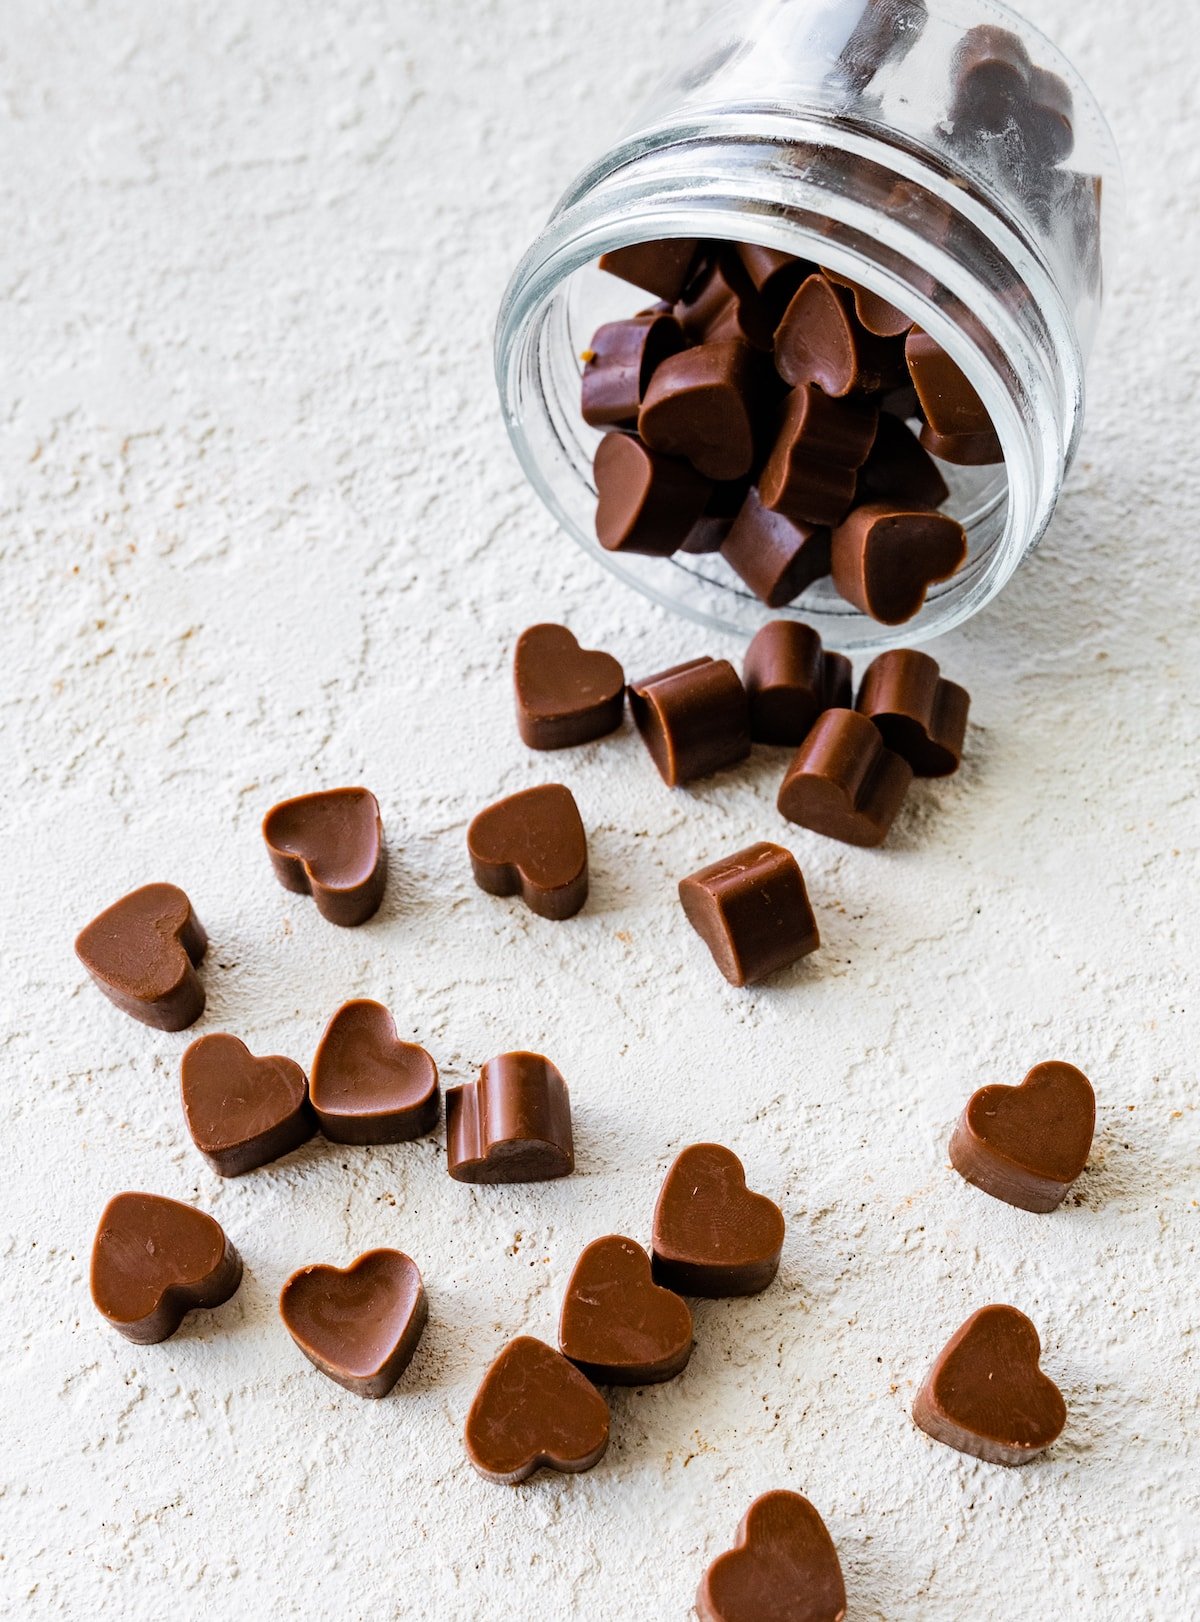 Heart-shaped poop chocolates falling out of a glass jar.